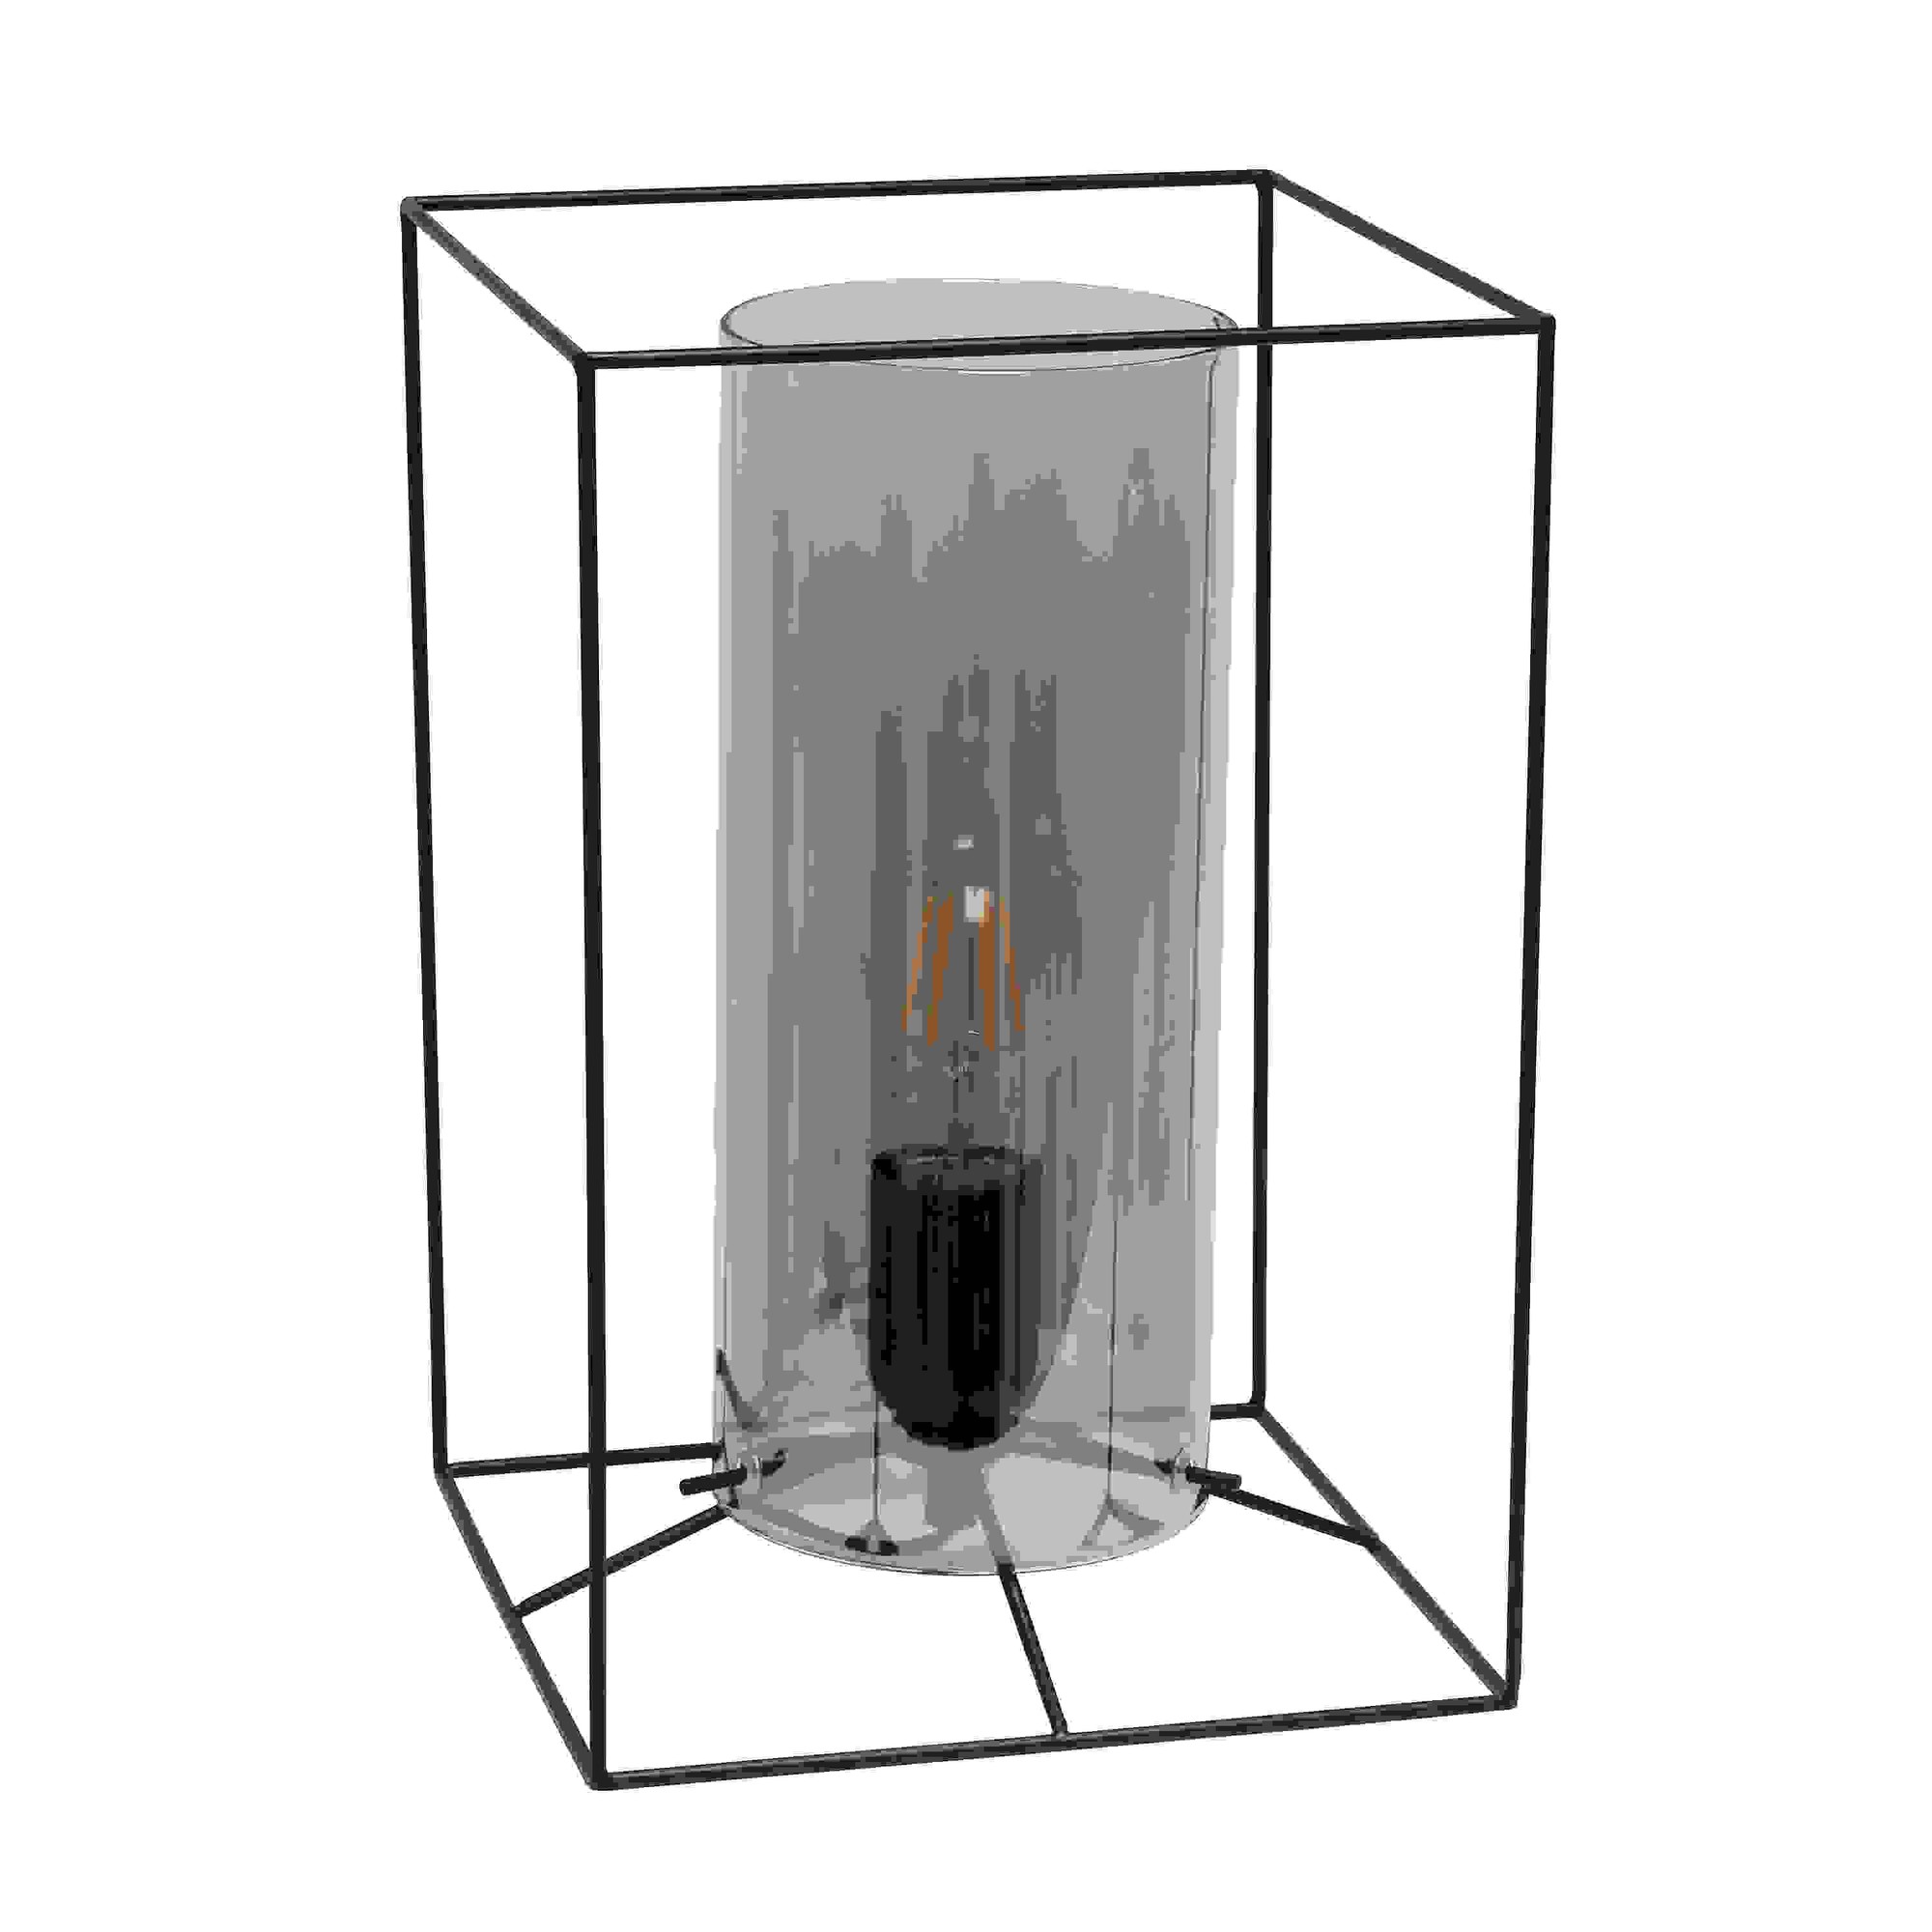  Lalia Home Black Framed Table Lamp with Smoked Cylinder Glass Shade, Large